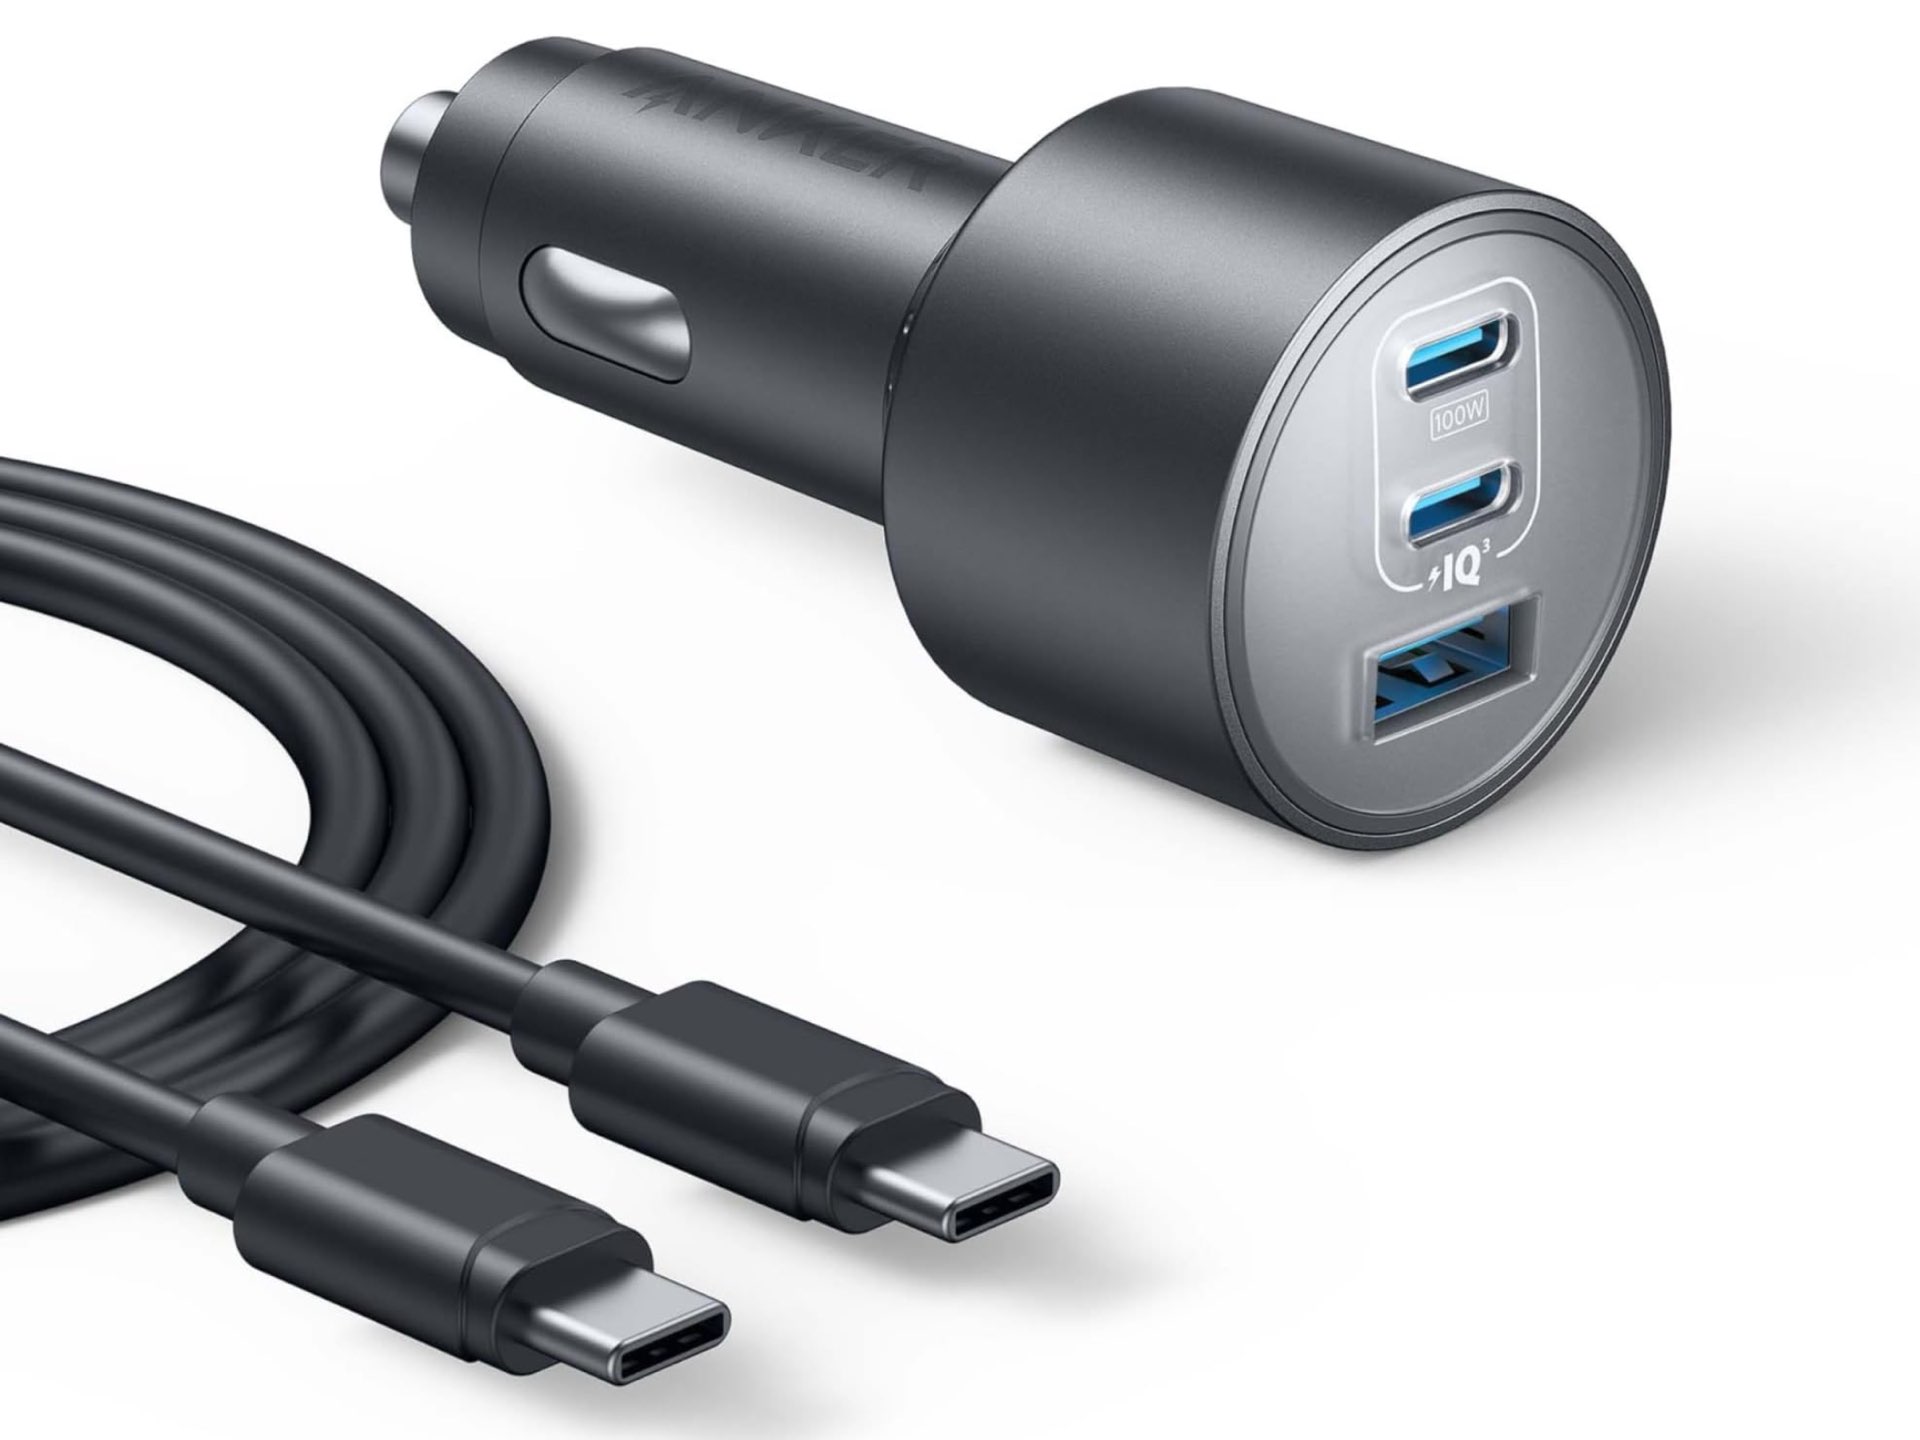 anker-167-5w-max-usb-c-car-charger